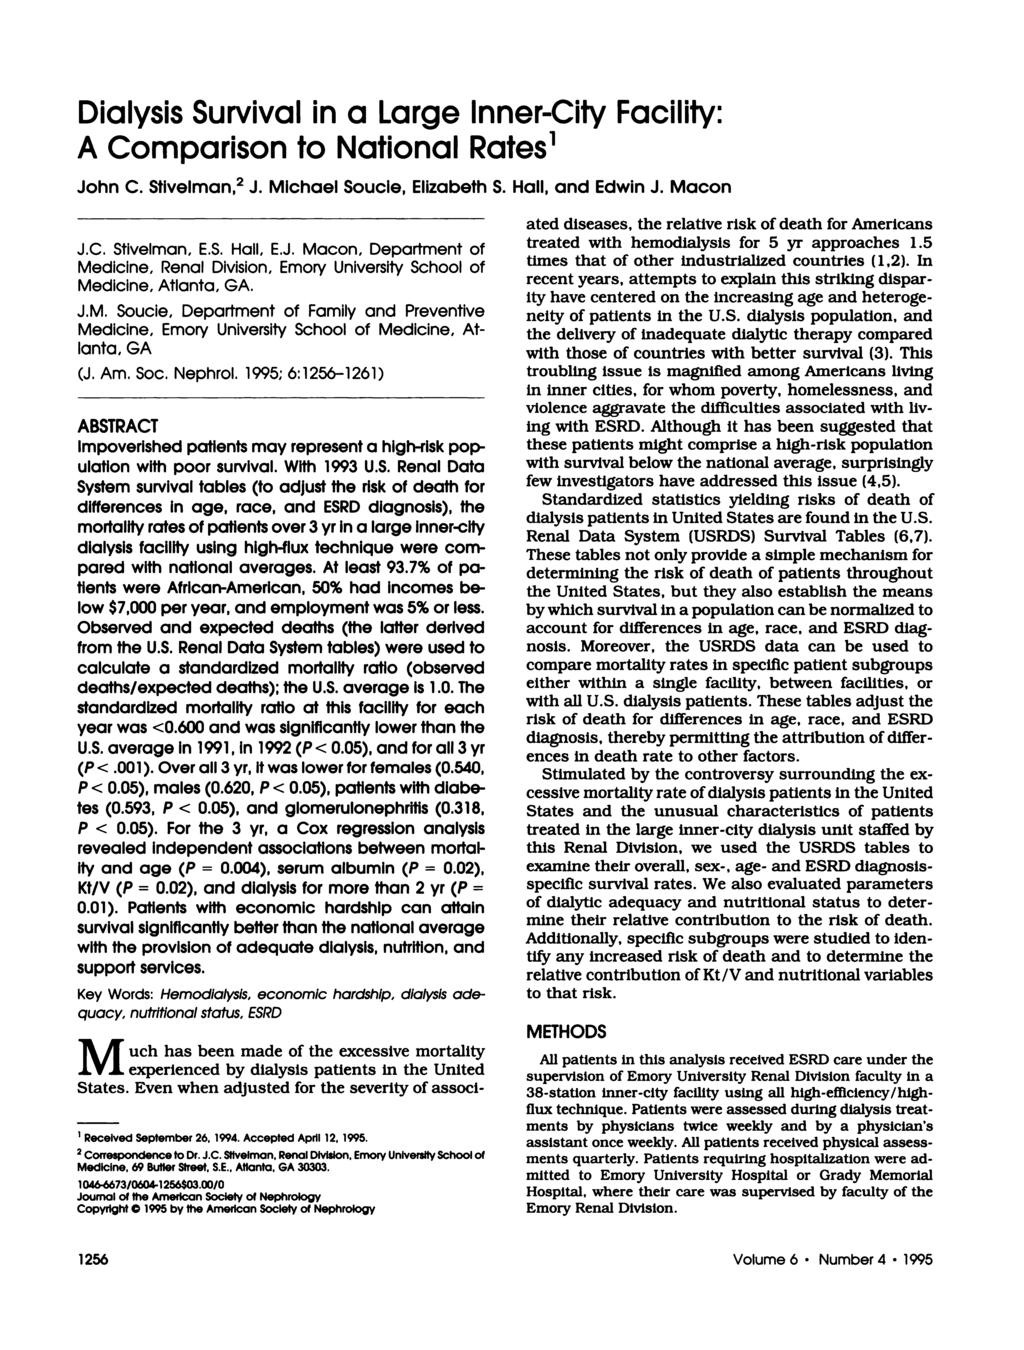 Dialysis Survival in a Large Inner-City Facility: A Comparison to National Rates1 John C. Stivelman,2 J. Michael Soucie, Elizabeth S. Hall, and Edwin J. Macon J.C. Stivelman. ES. Hall. E.J. Macon, Department of Medicine, Renal Division, Emory University School of Medicine, Atlanta, GA.